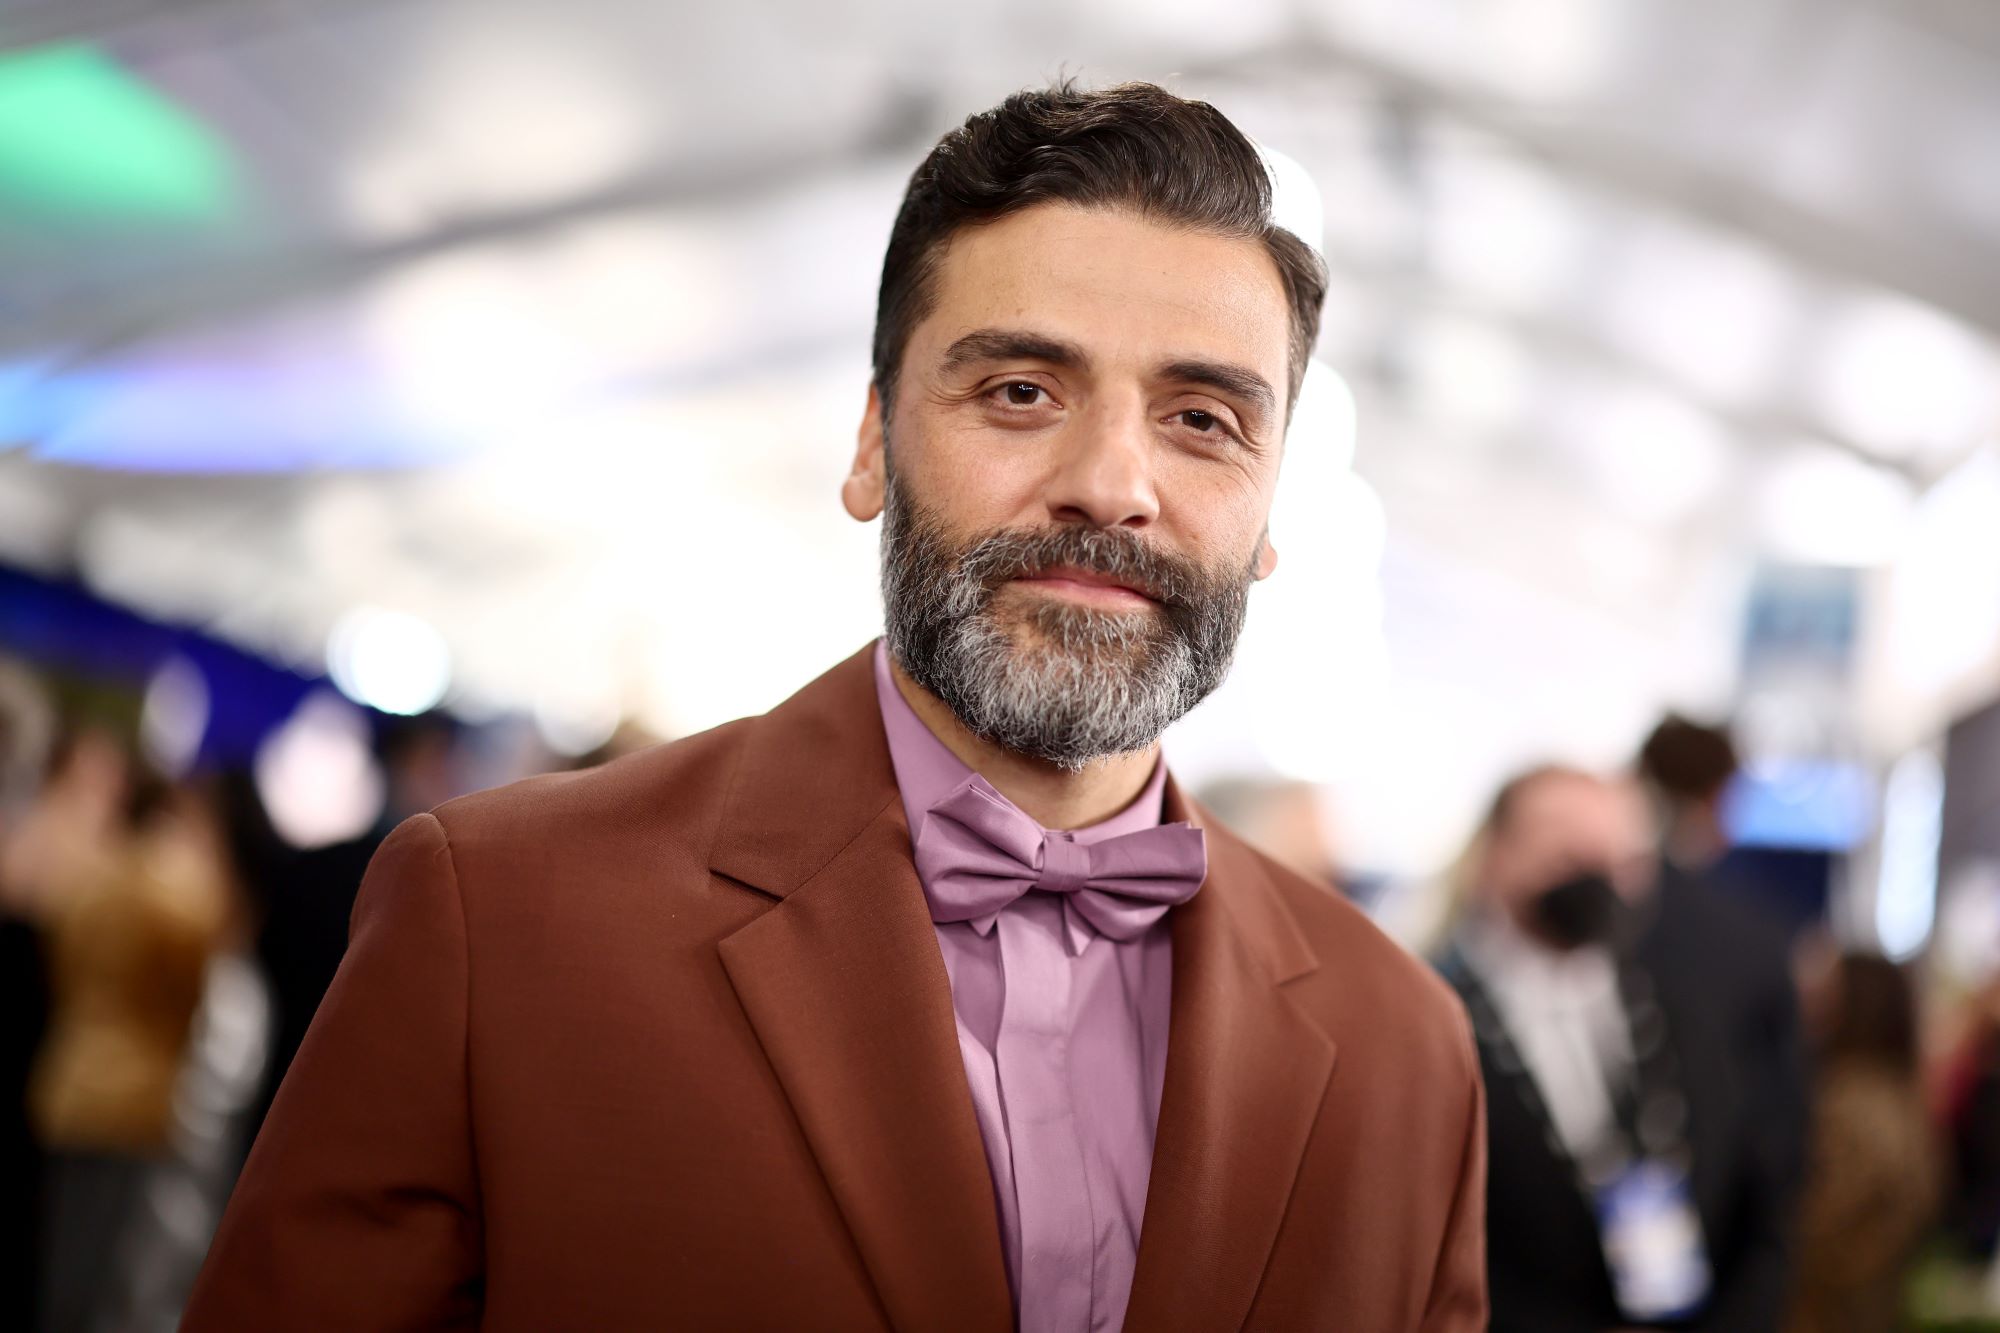 Oscar Isaac, who stars in 'Moon Knight,' wears a brown suit over a light purple button-up shirt and bow tie.